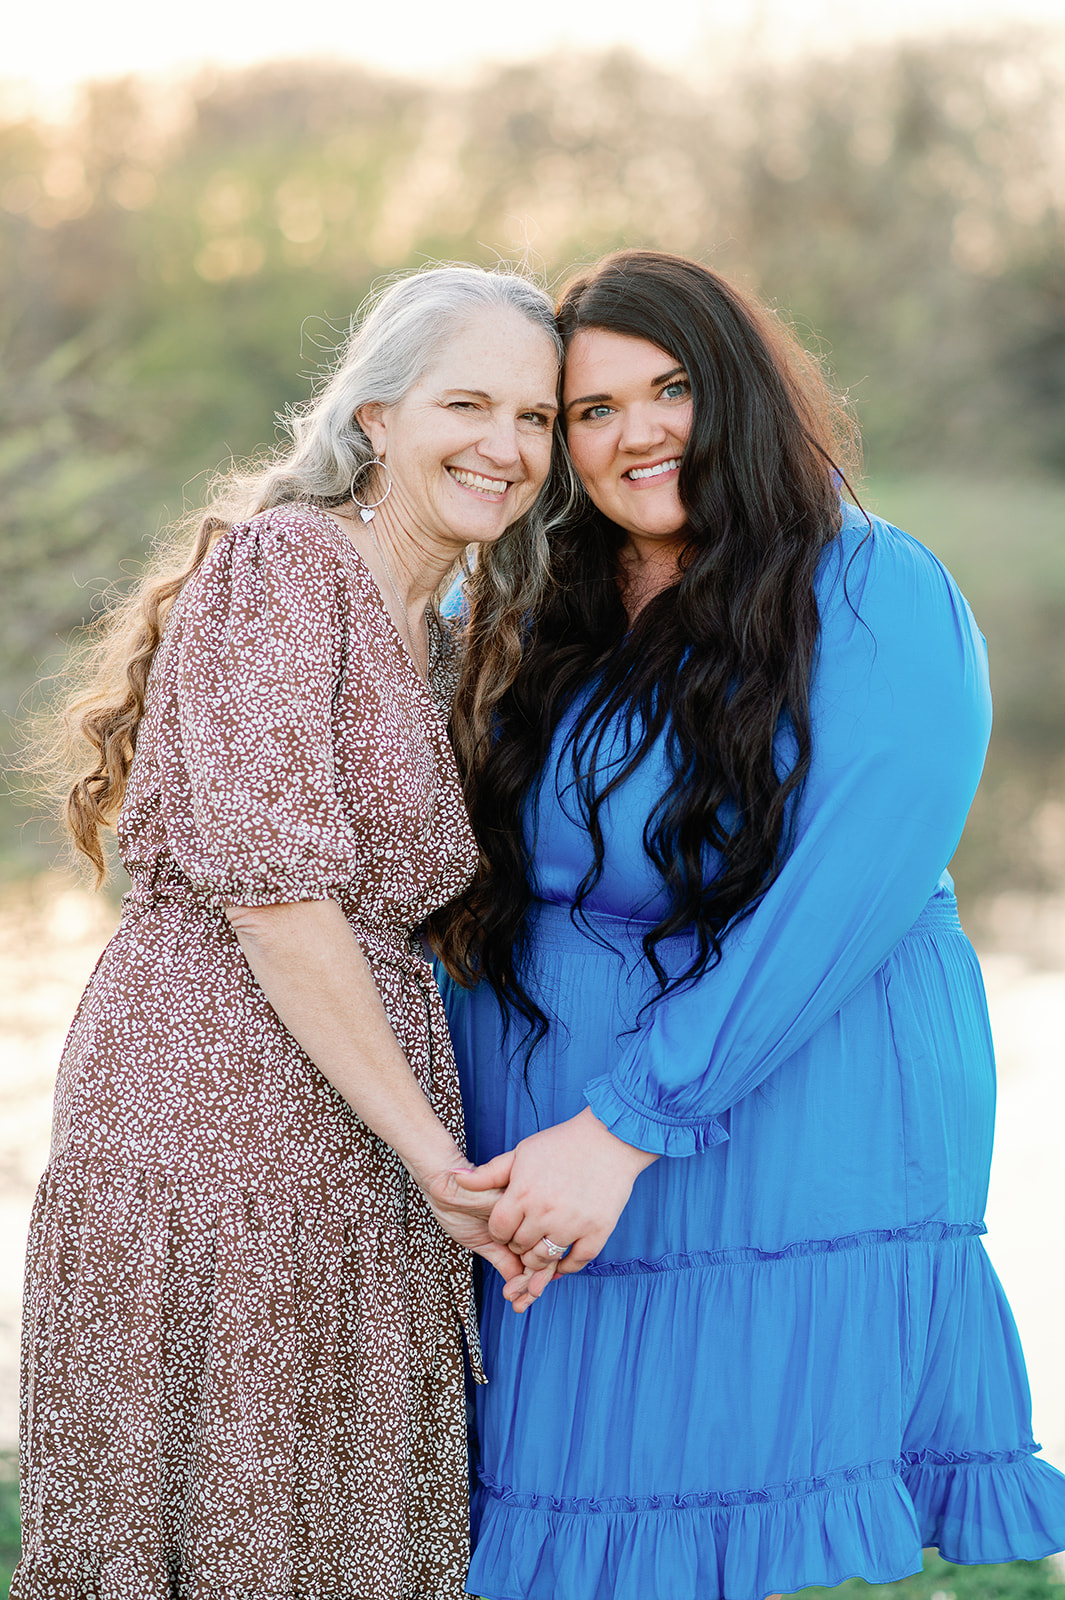 Sulphur Springs, TX Mother and Daughter photo session featuring photography by Candace Pair Photography;